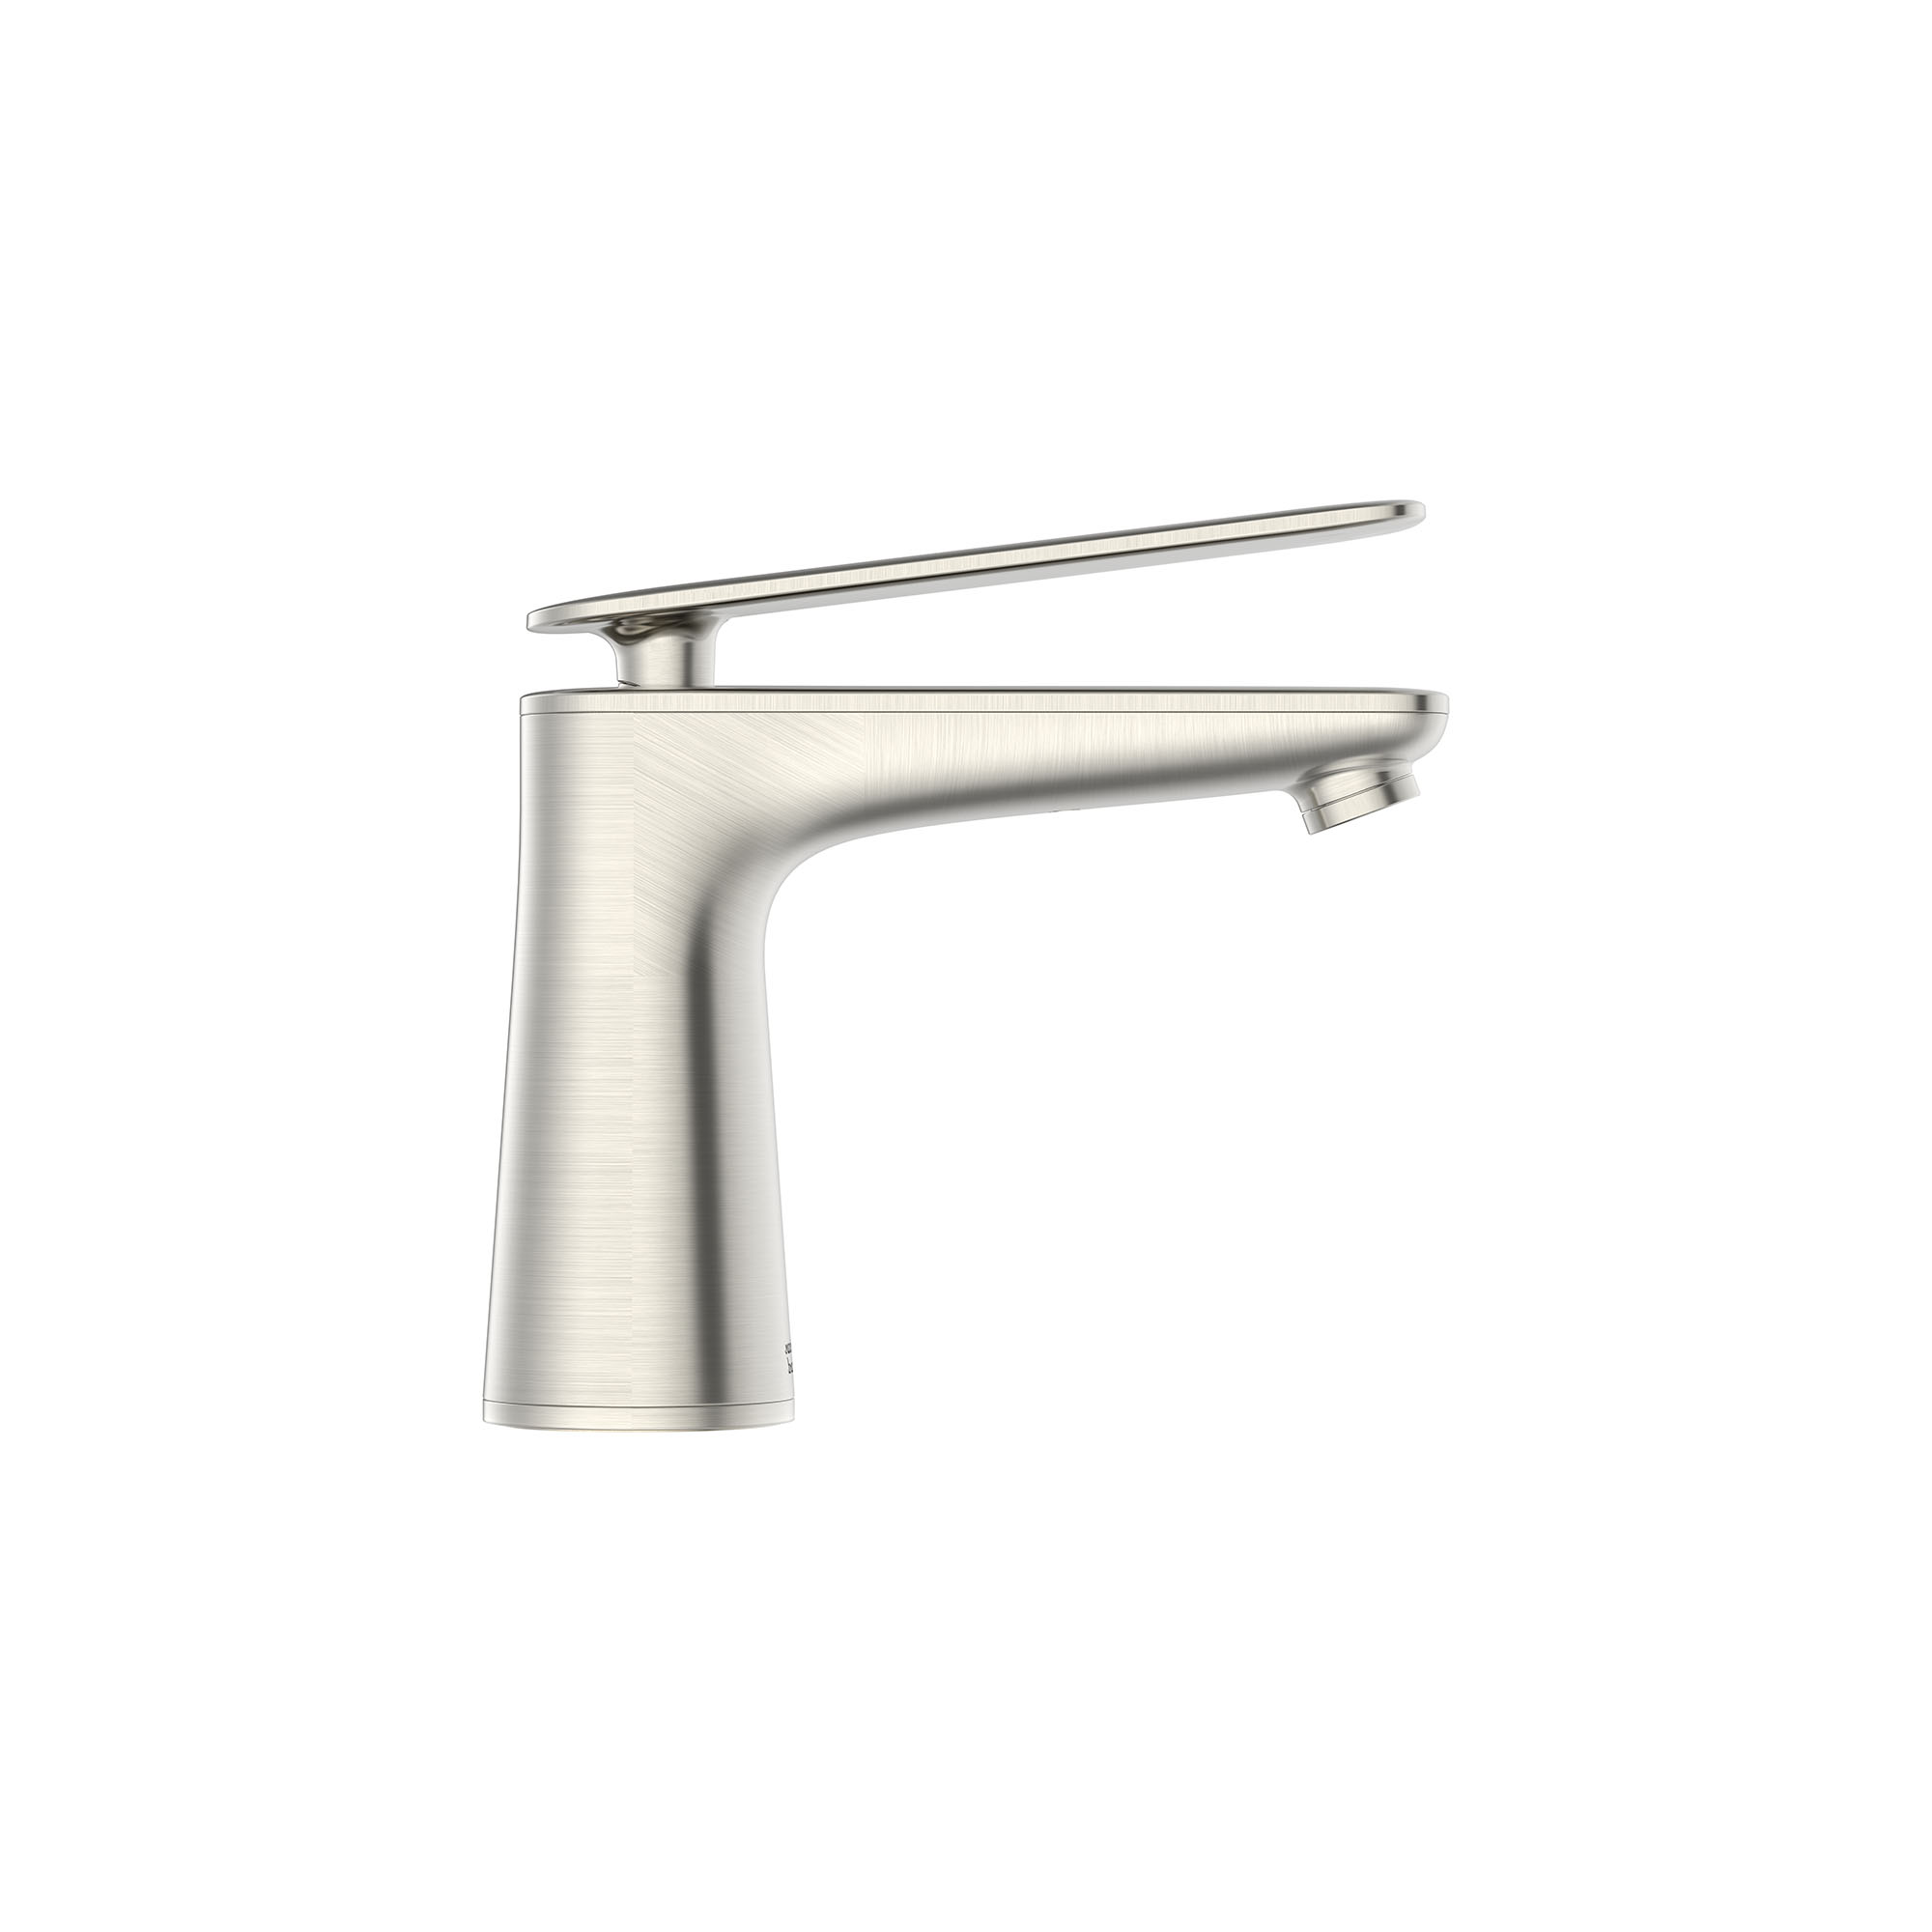 Aspirations™ Single-Handle Bathroom Faucet 1.2 gpm/4.5 L/min With Lever Handle